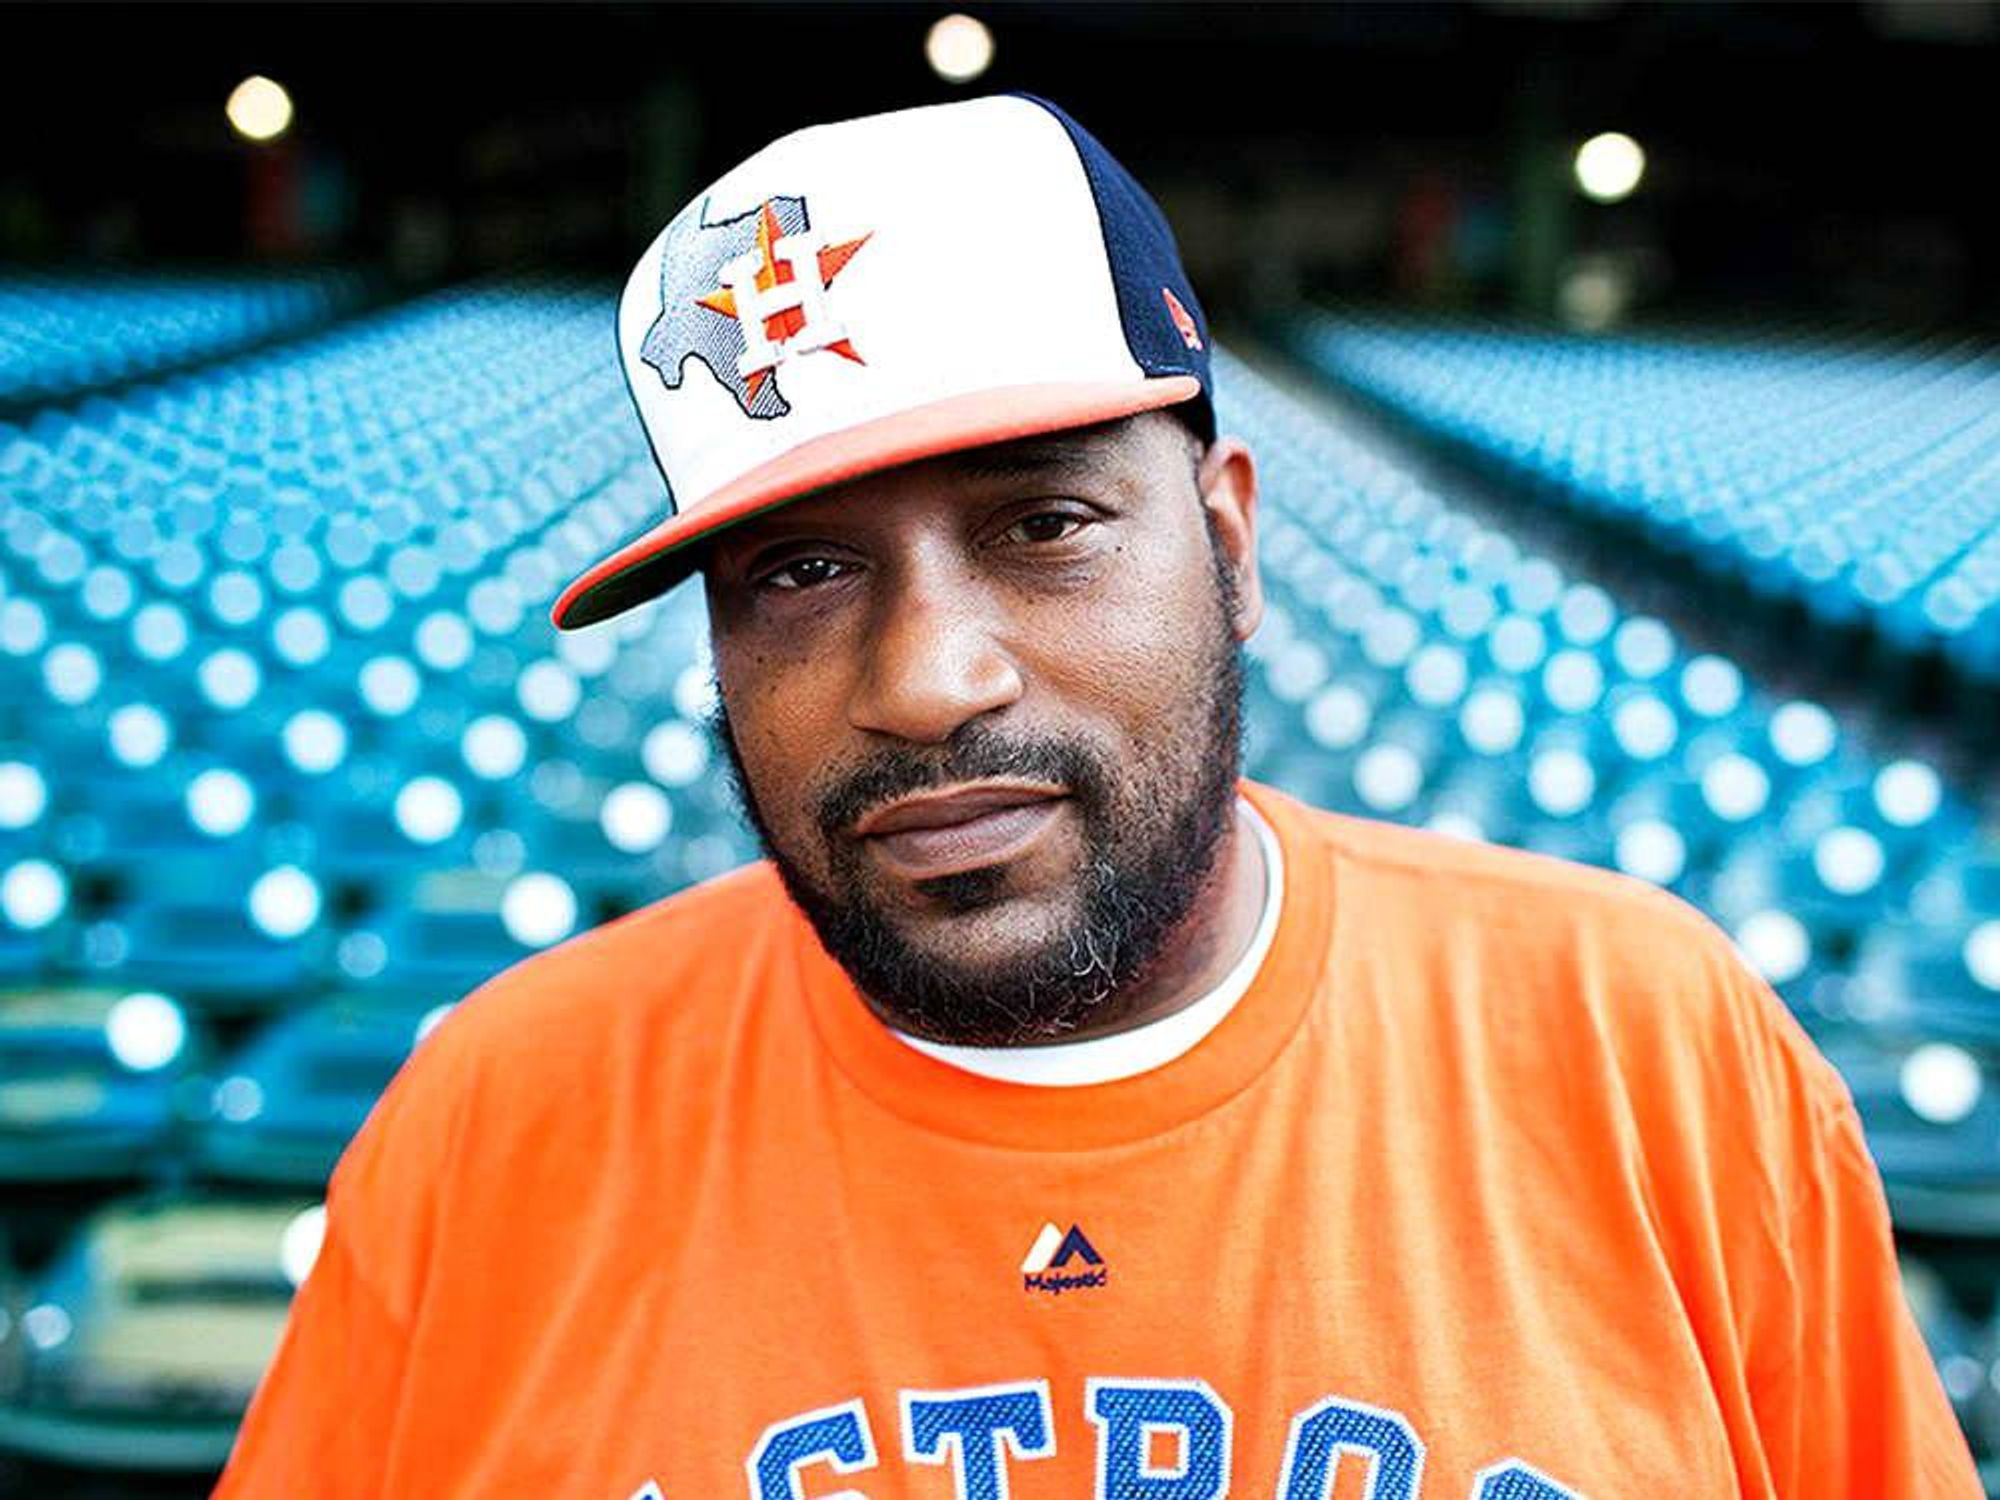 Houston rap legend Bun B hosts the ultimate weekend party for a